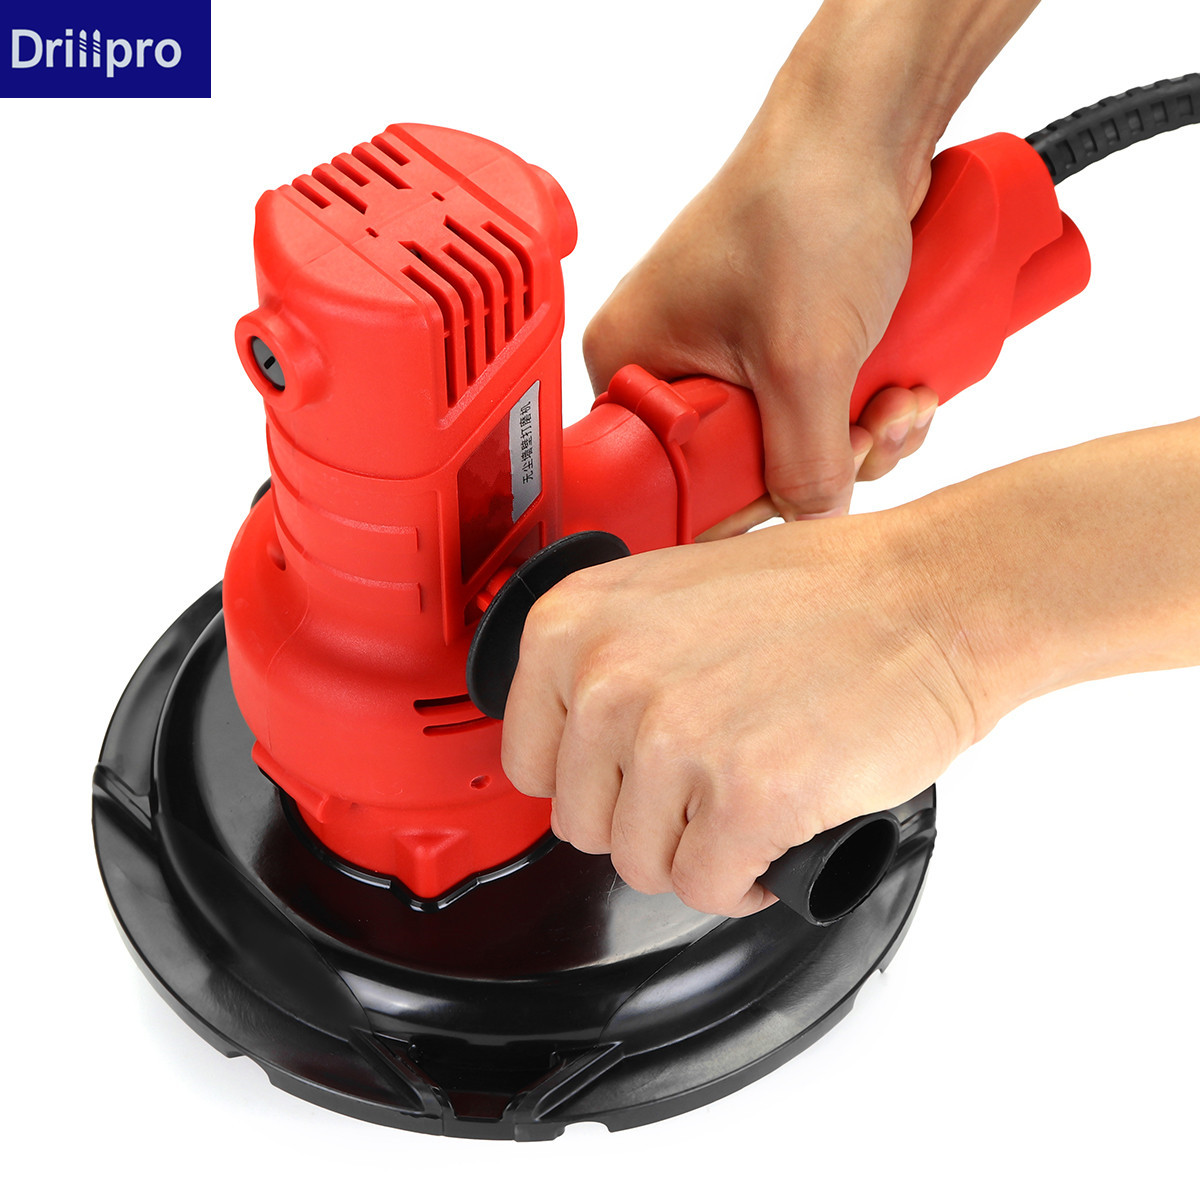 AC220V 2600rpm Wall Polisher Drywall Sander Variable Speed Handheld Sandpaper Dust Hoses Collection Bag Dust Free